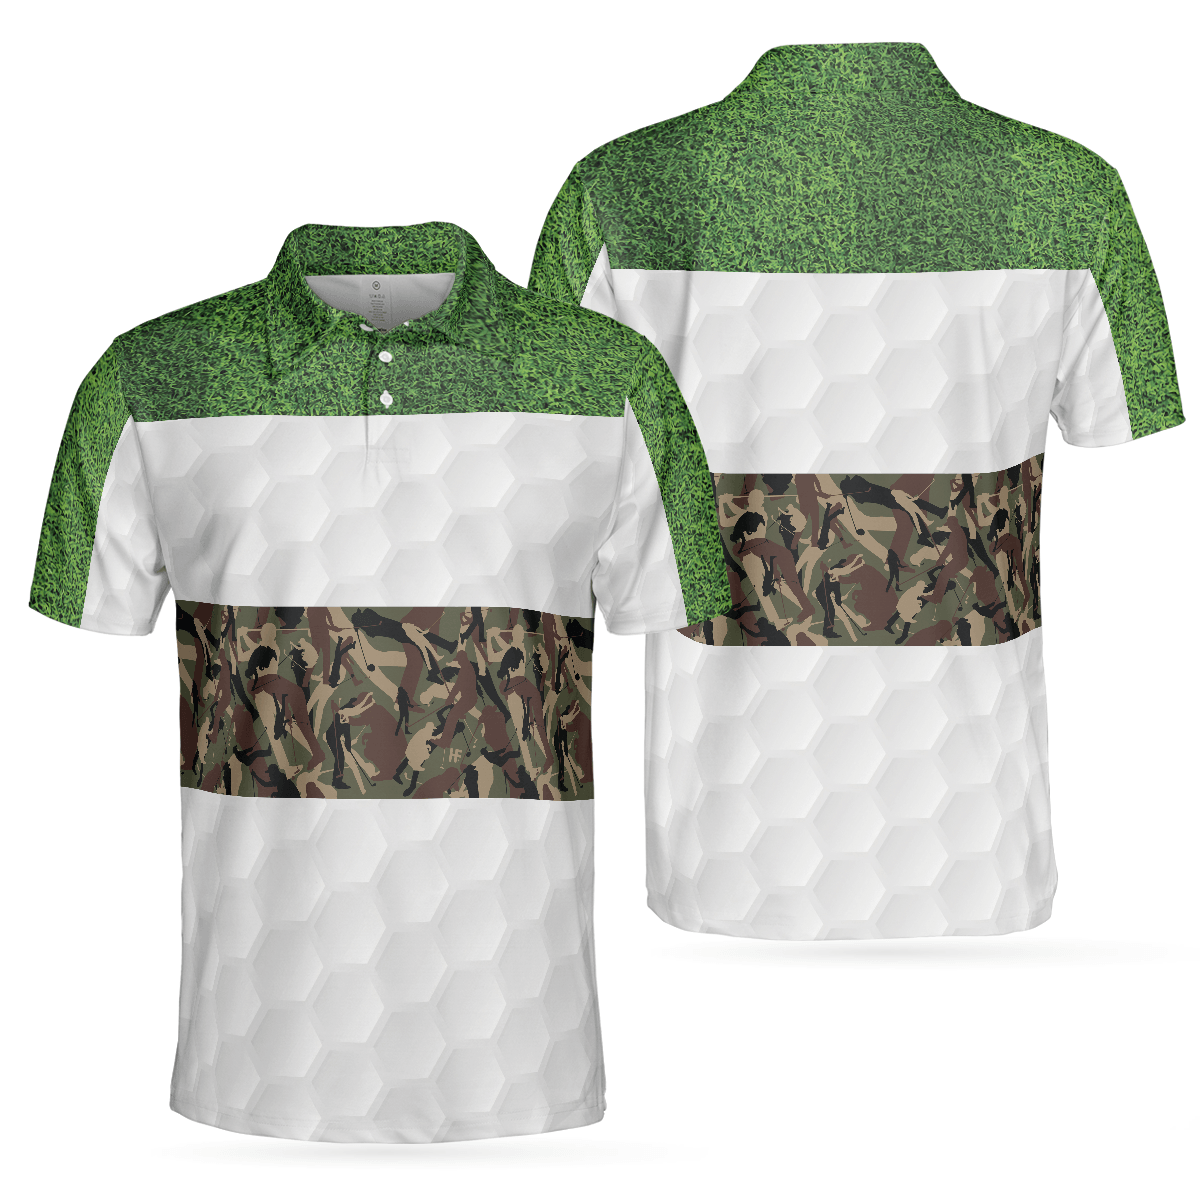 Men Golf Polo Shirt - Golf In Green And Camouflage Pattern Golf Men Polo Shirt, Cool Men Golf Polo Shirt - Perfect Polo Shirt For Men, Golfers - Amzanimalsgift